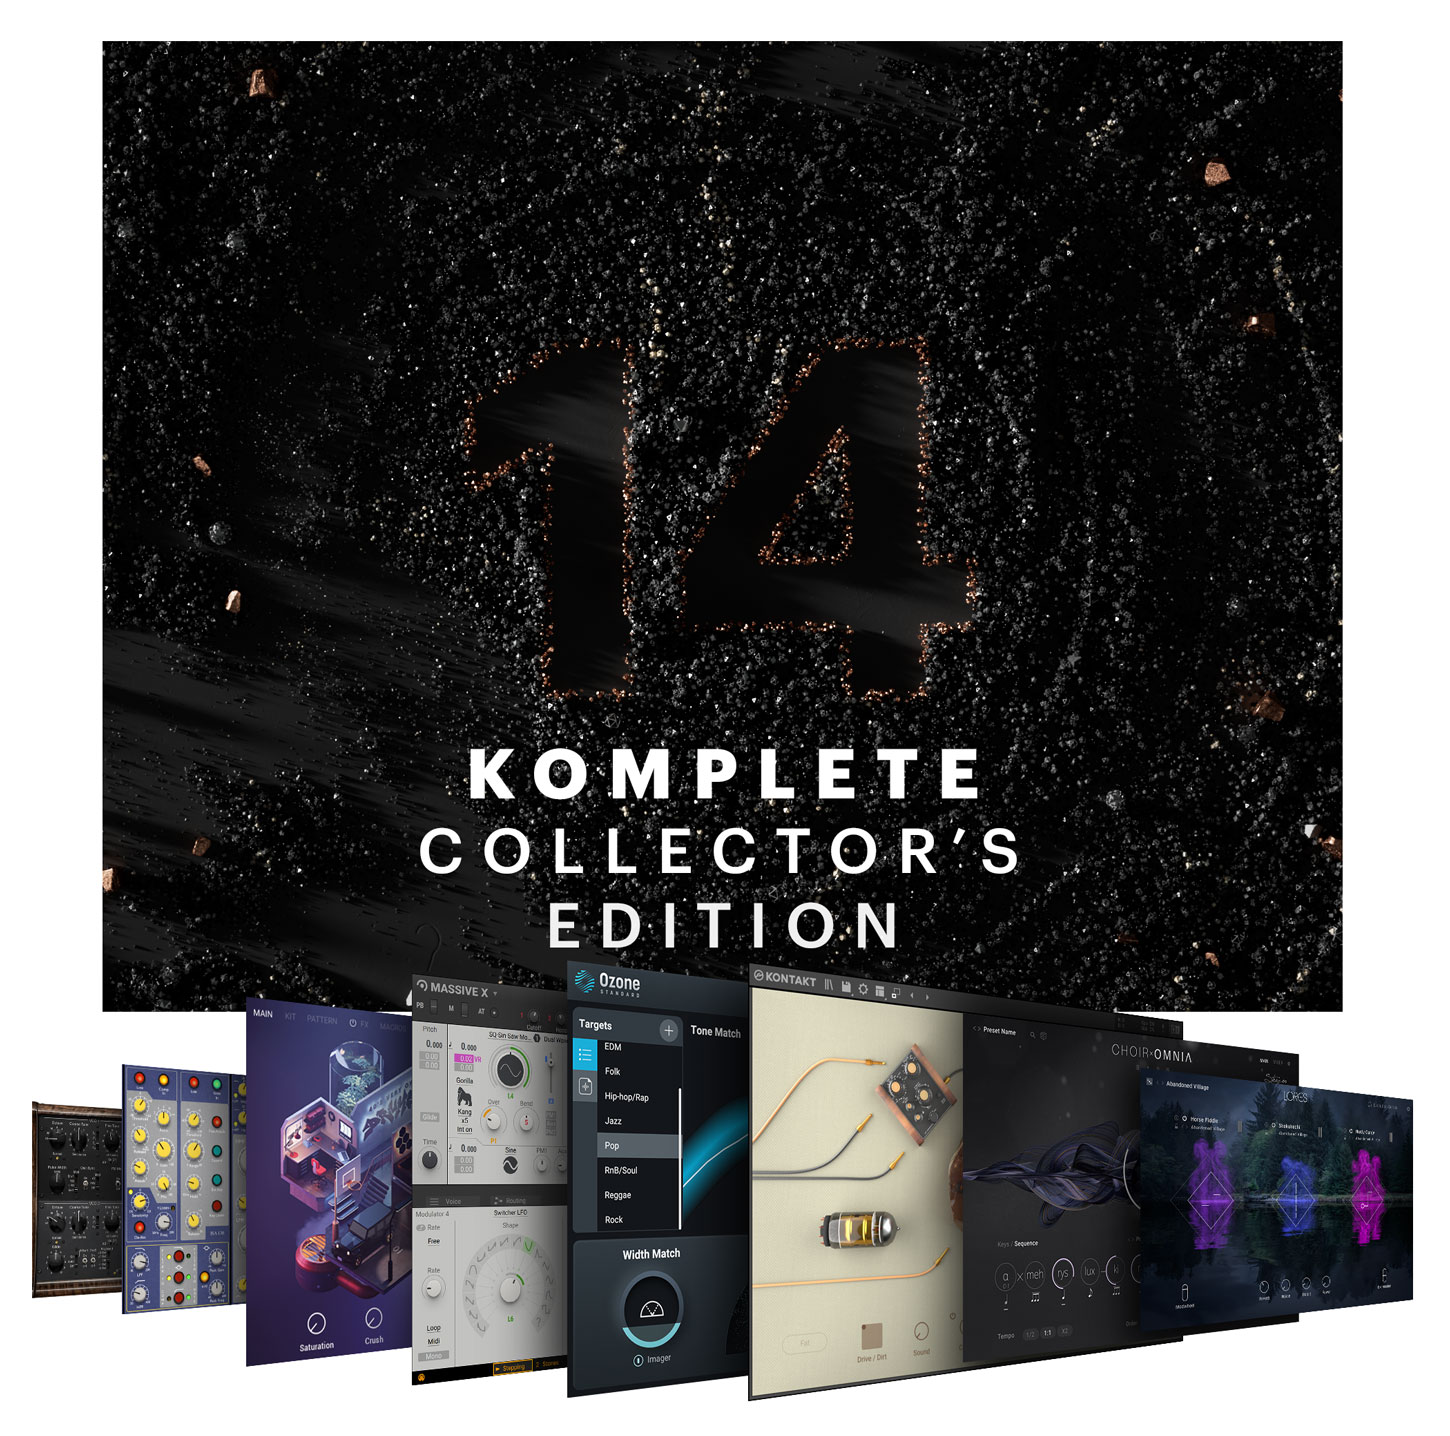 Komplete 14 Ultimate Collector's Edition